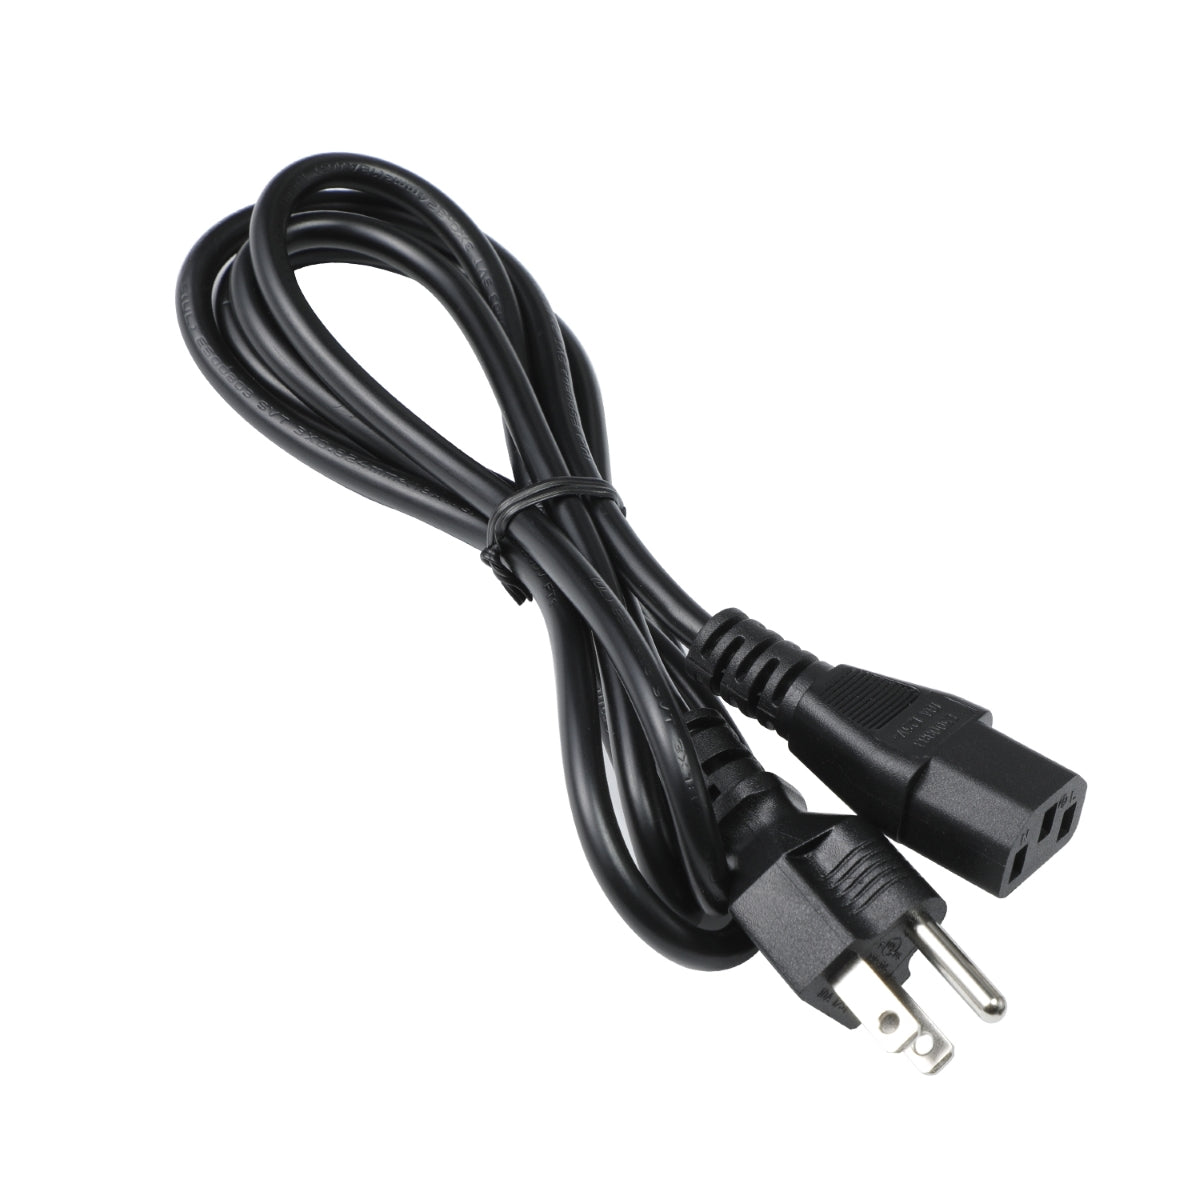 Power Cord for HP Pavilion 550-044 Computer.